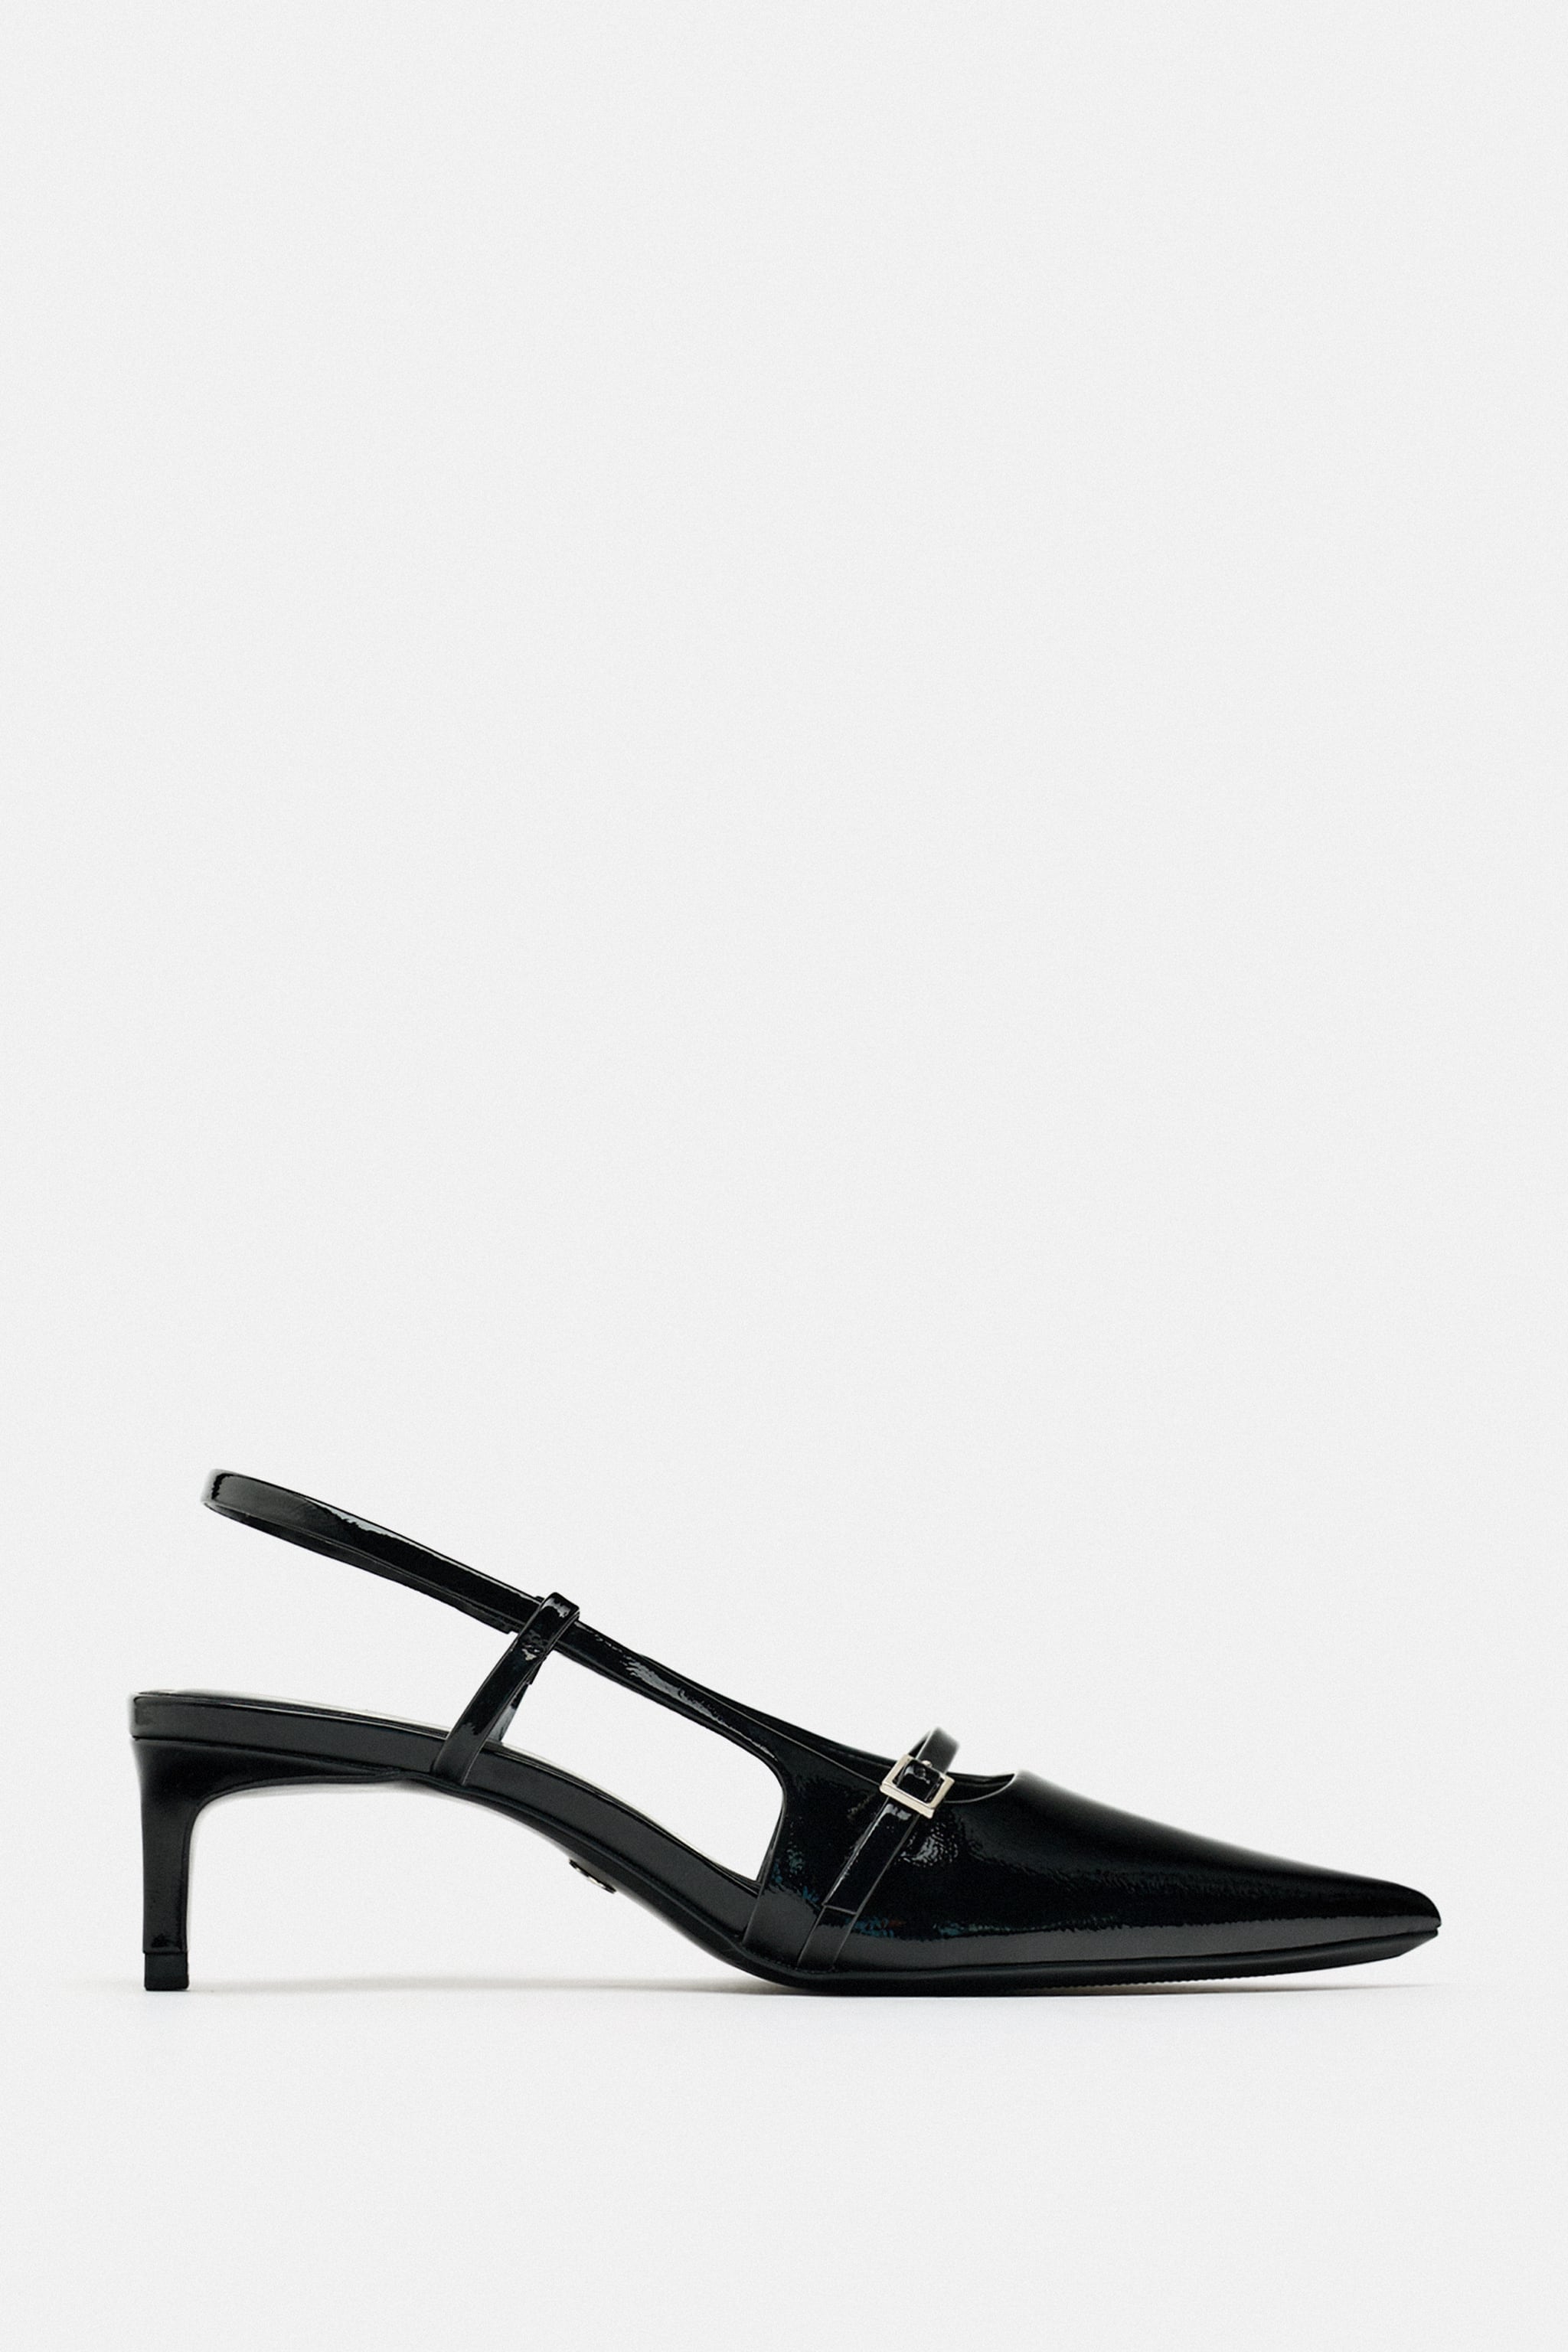 Zara + Slingback Sneakers with Buckled Strap